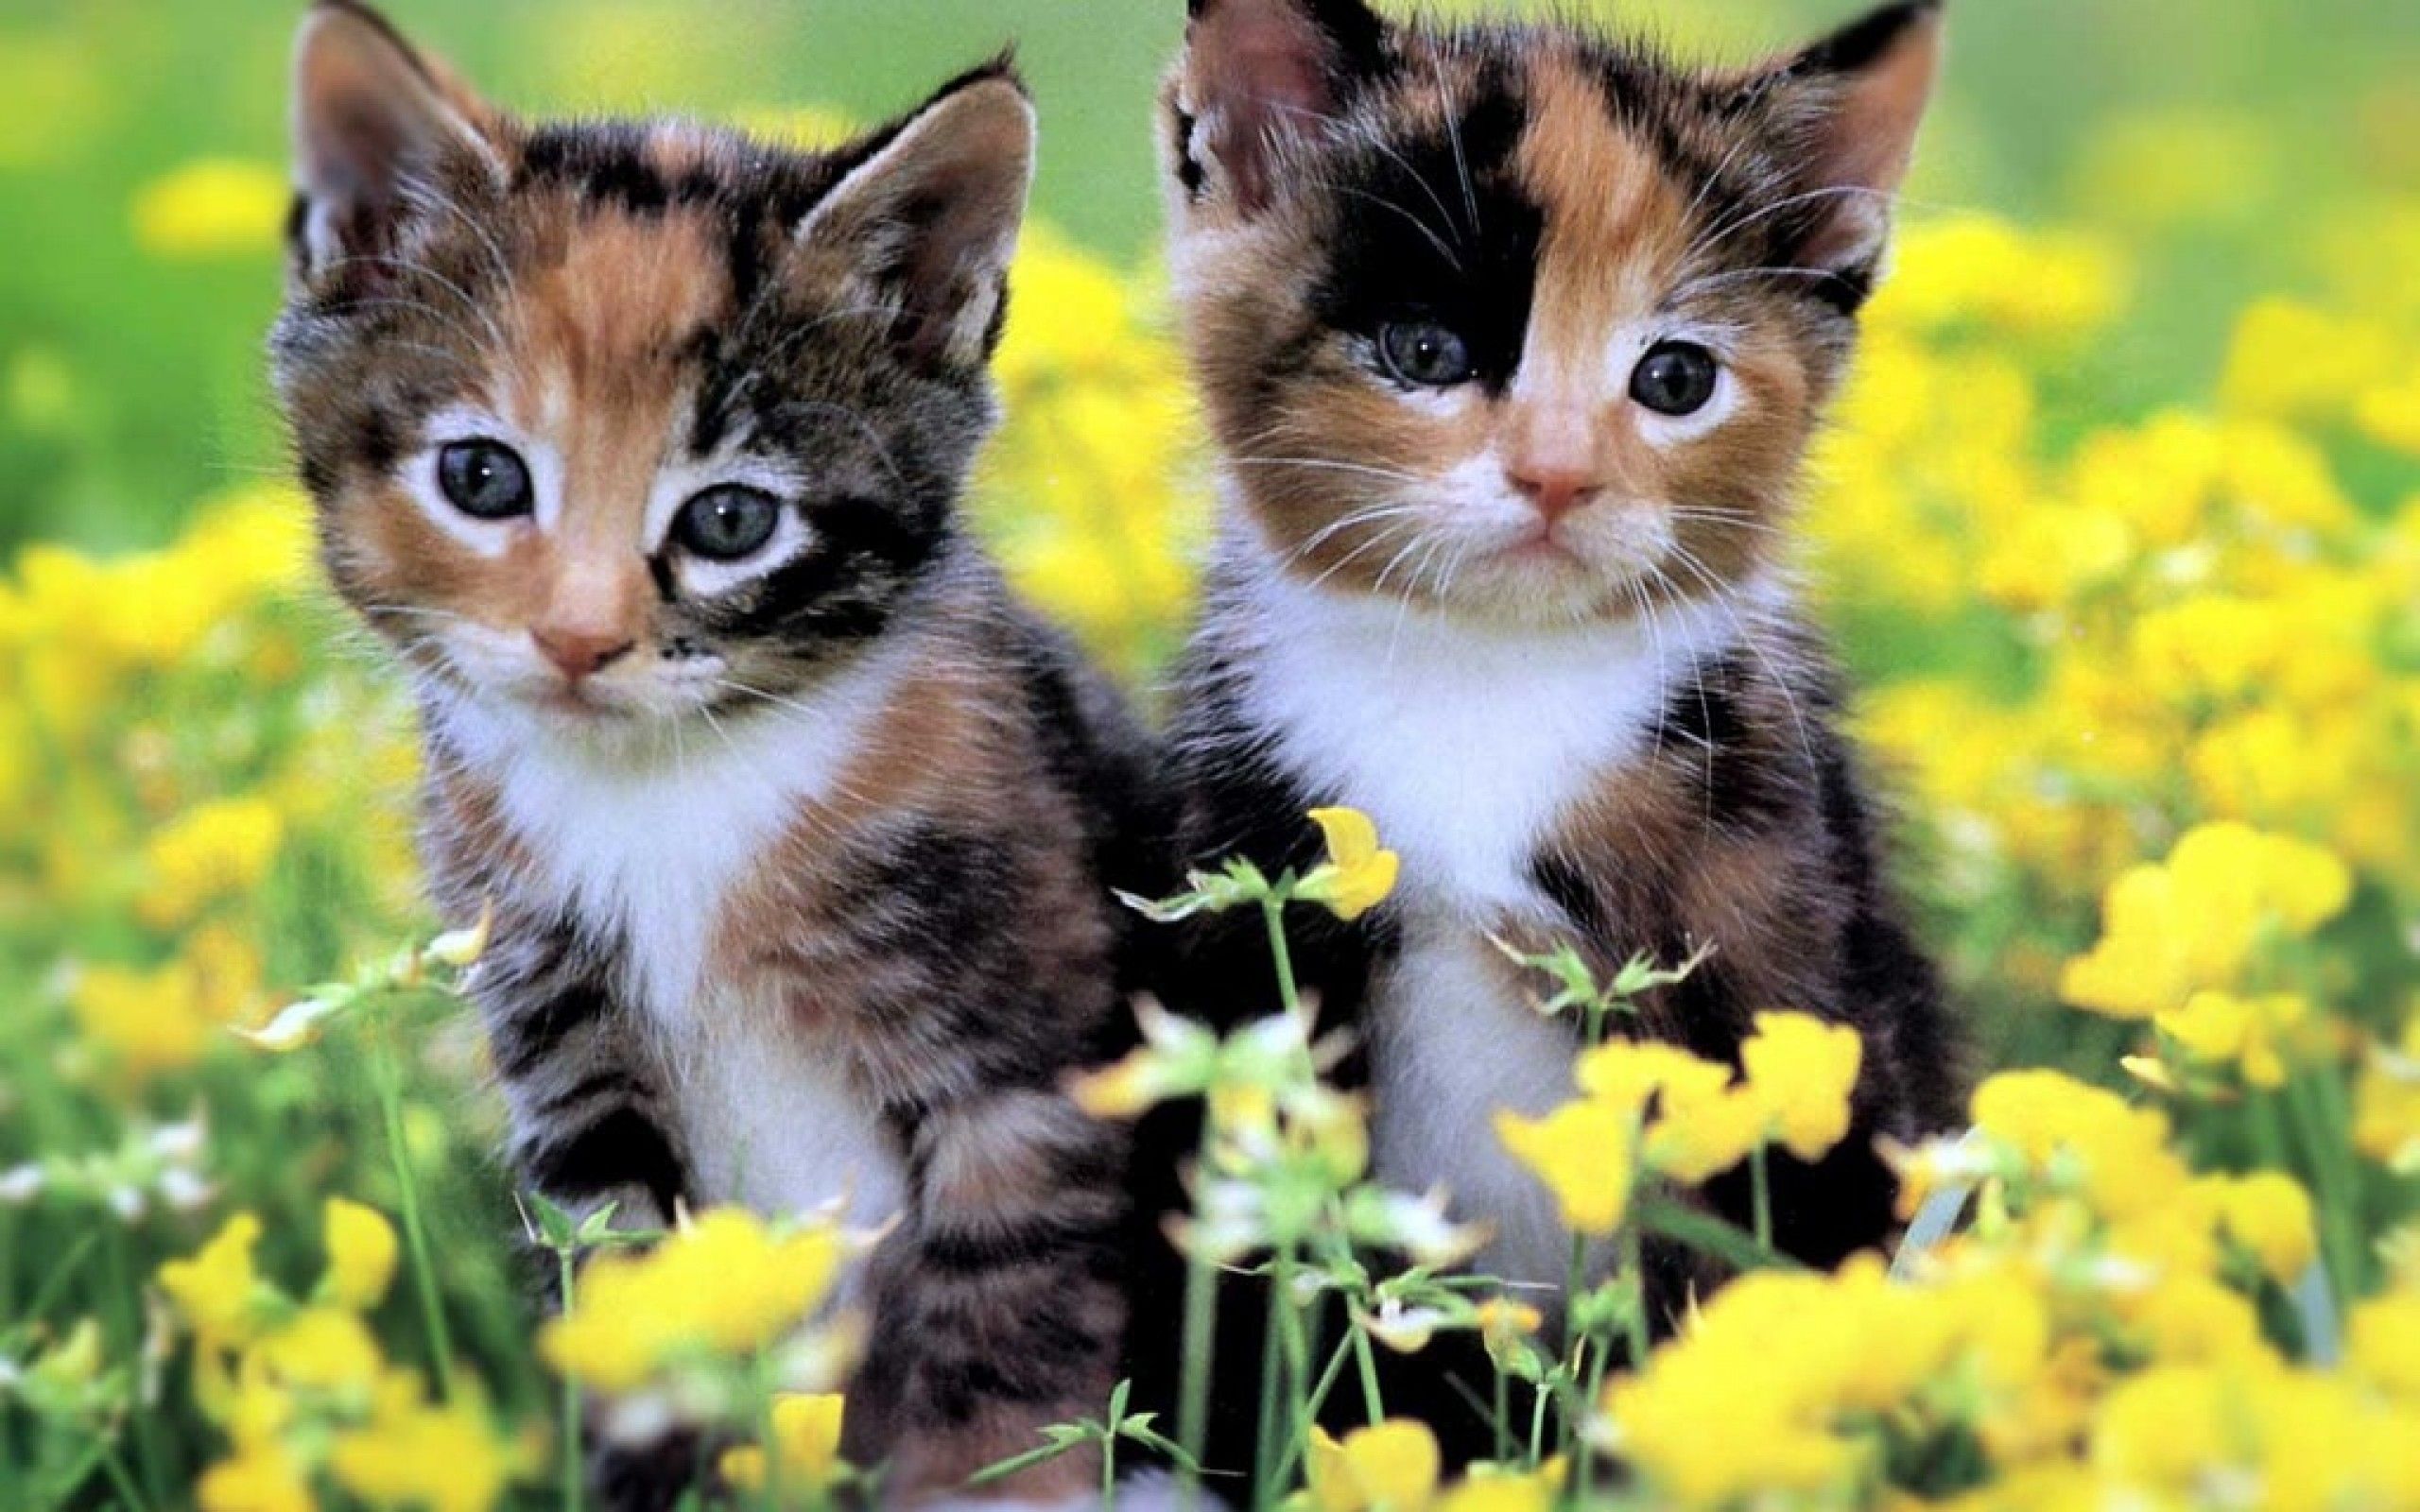 Cute kitty wallpaperAmazoncomAppstore for Android